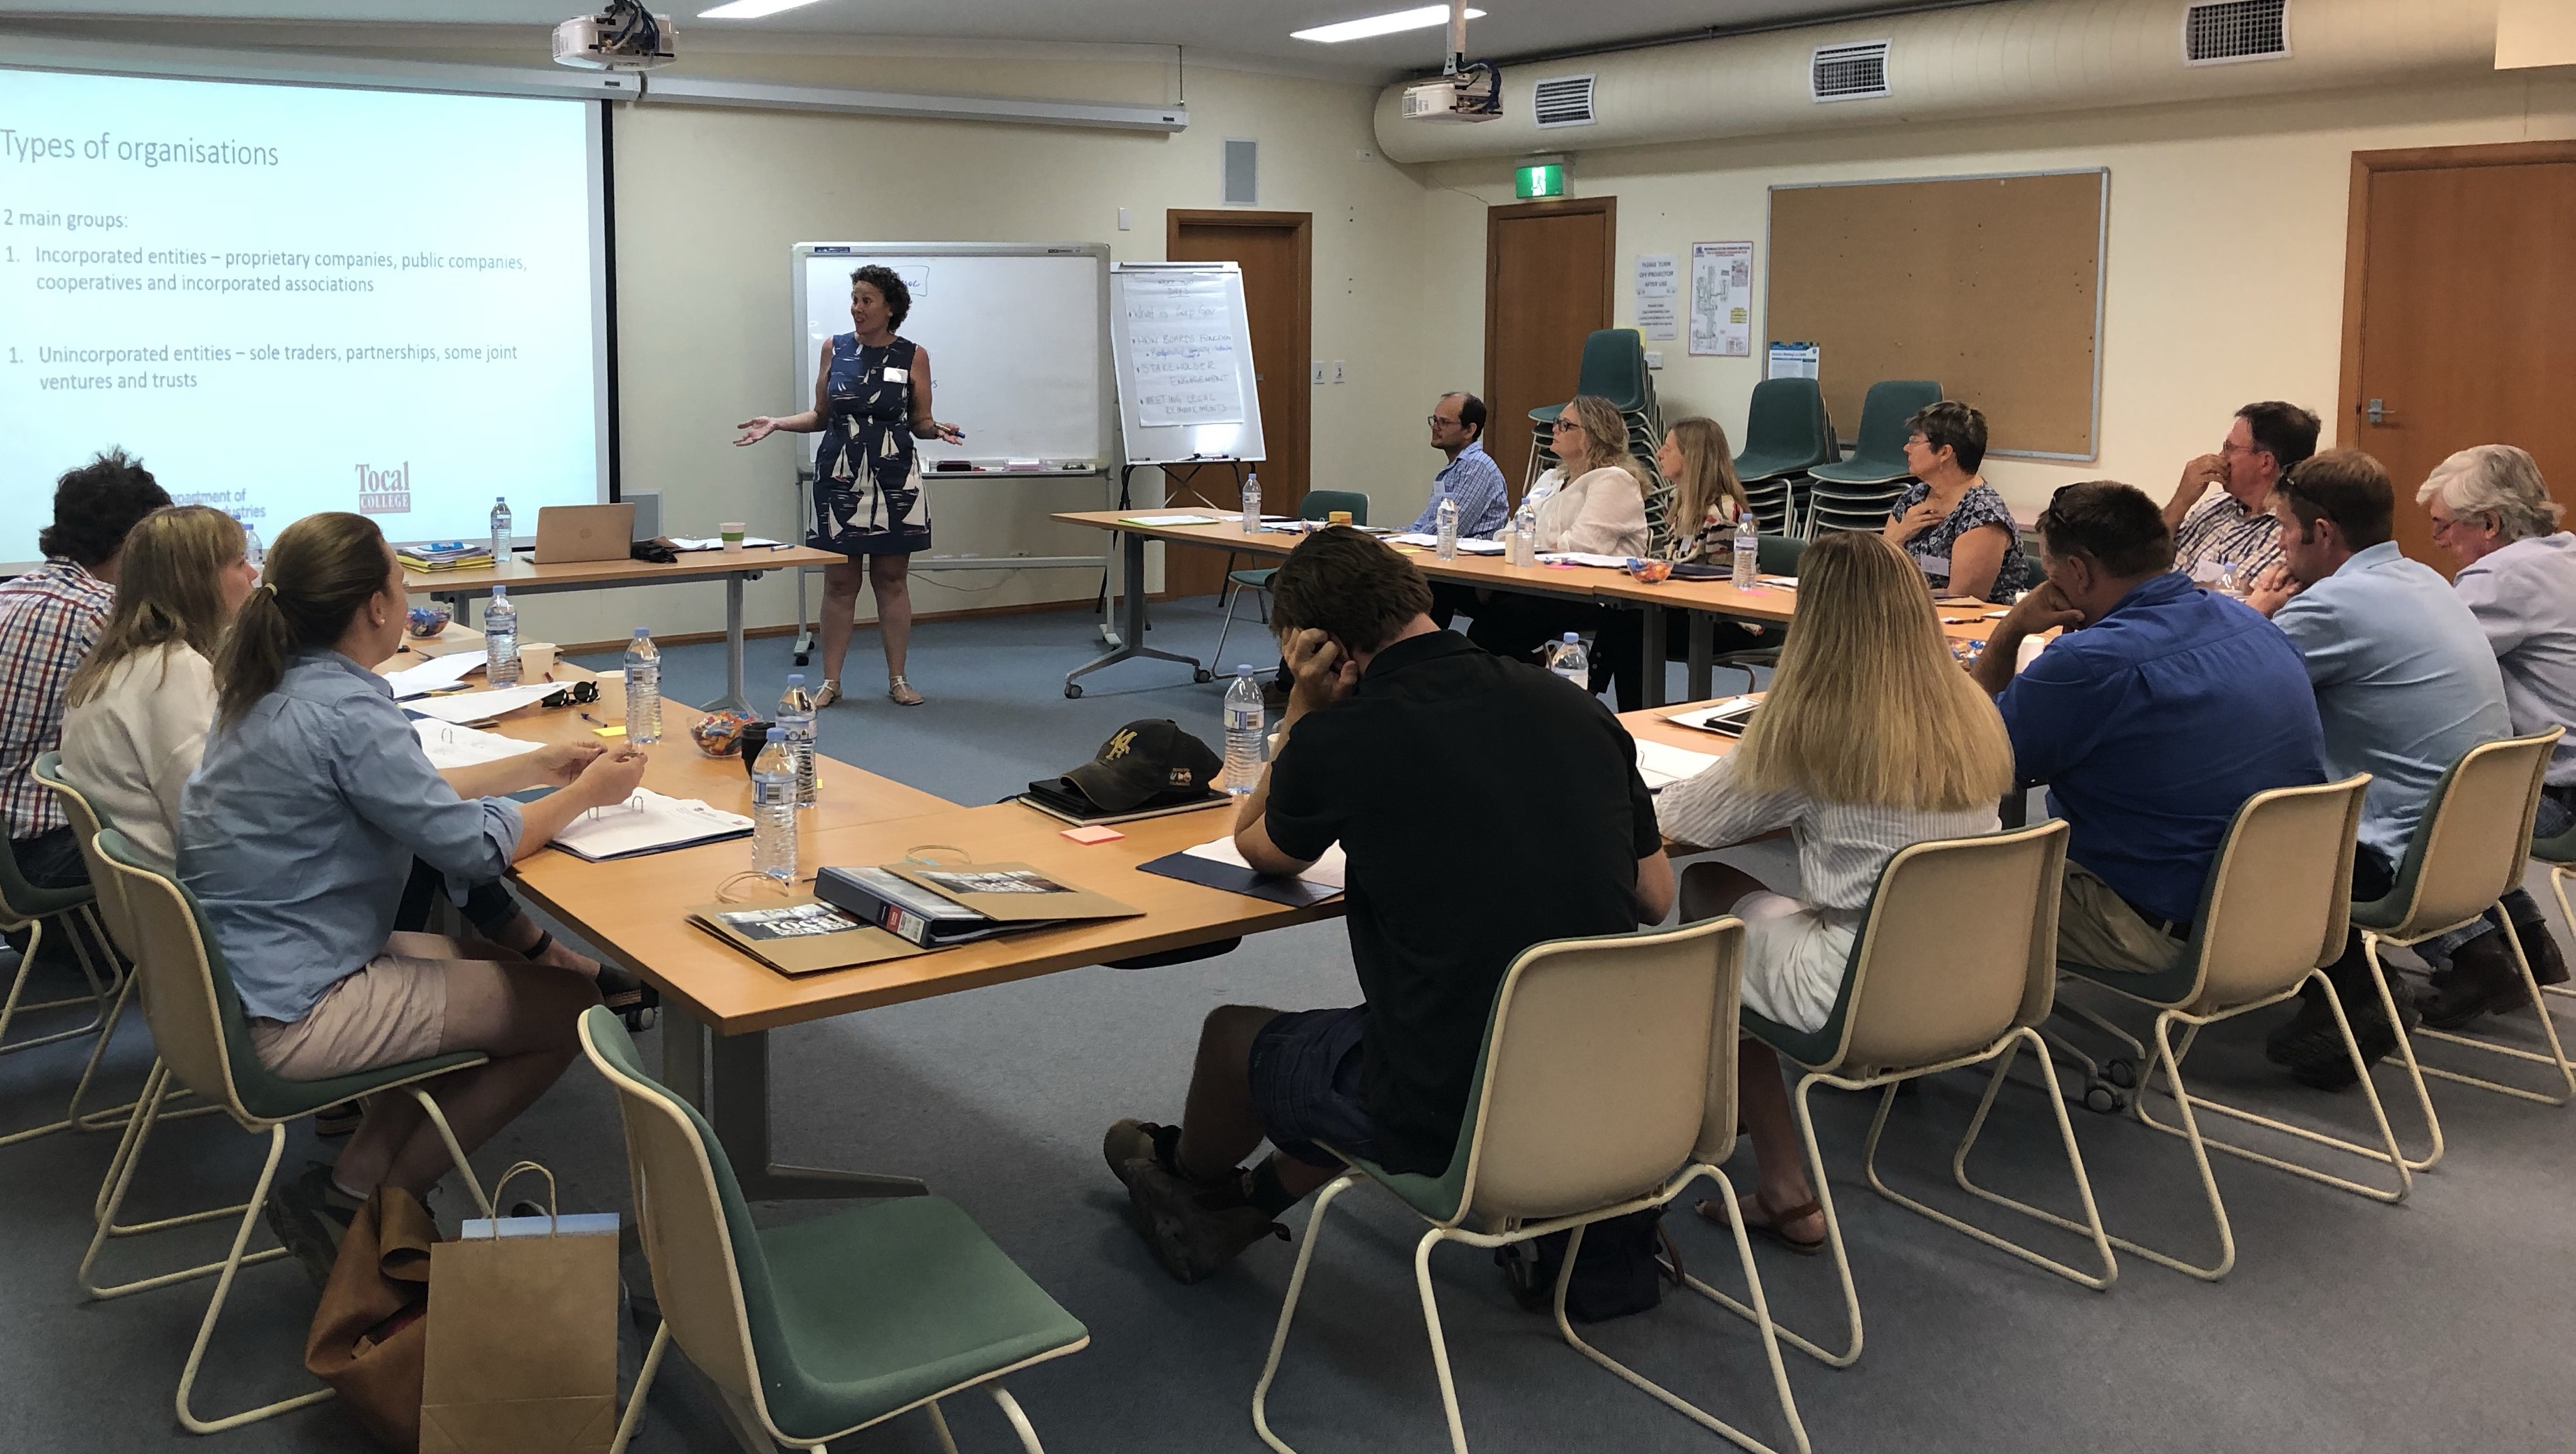 New Corporate Governance course recently held at Narrabri